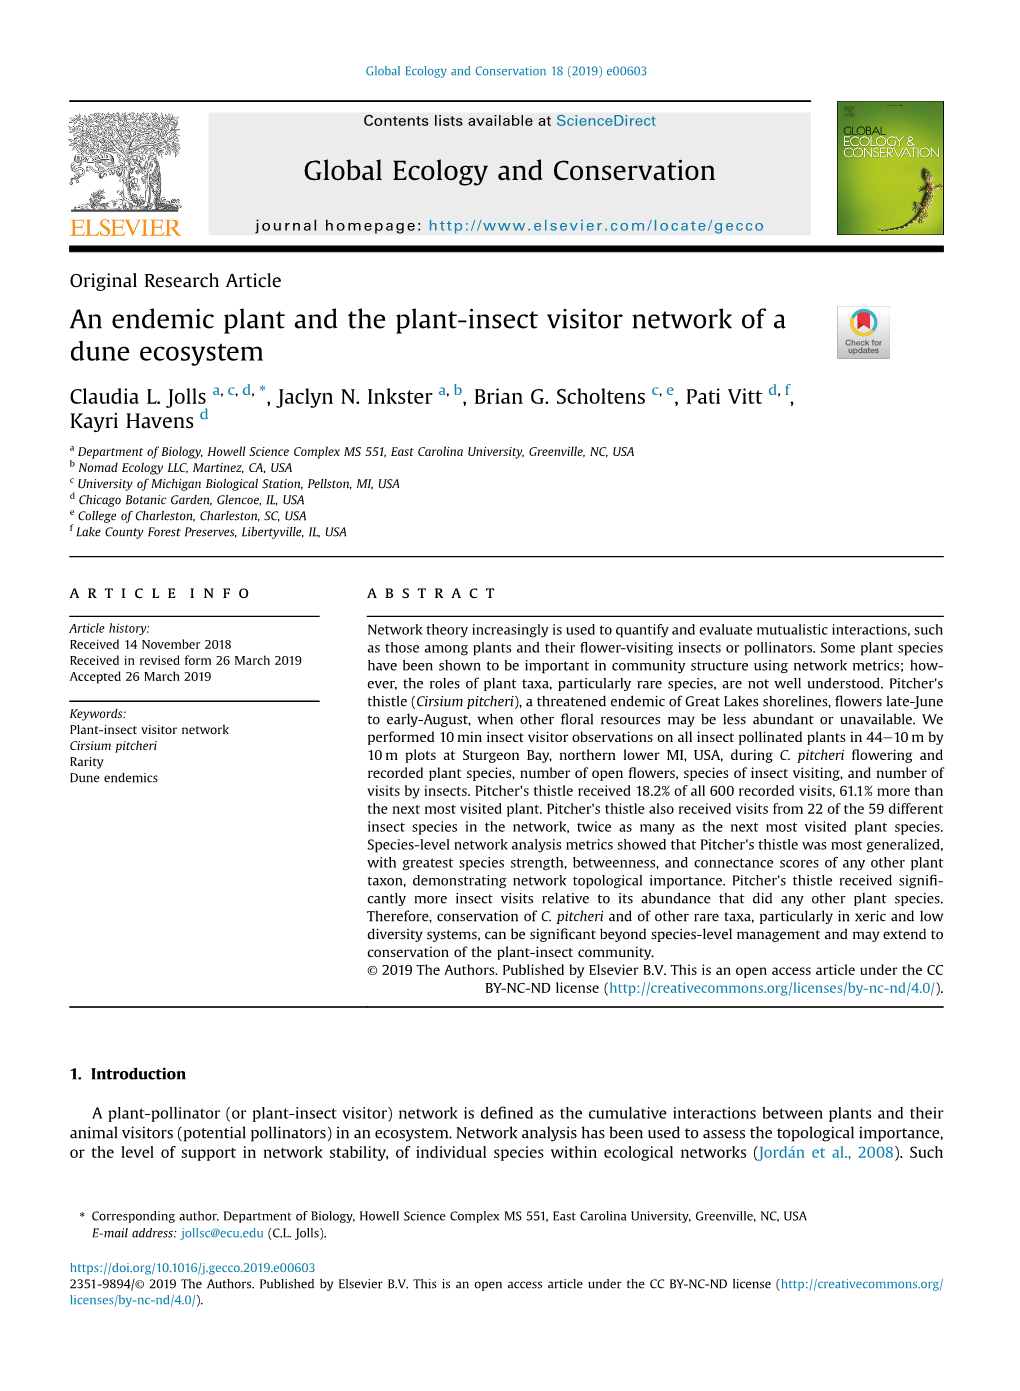 An Endemic Plant and the Plant-Insect Visitor Network of a Dune Ecosystem